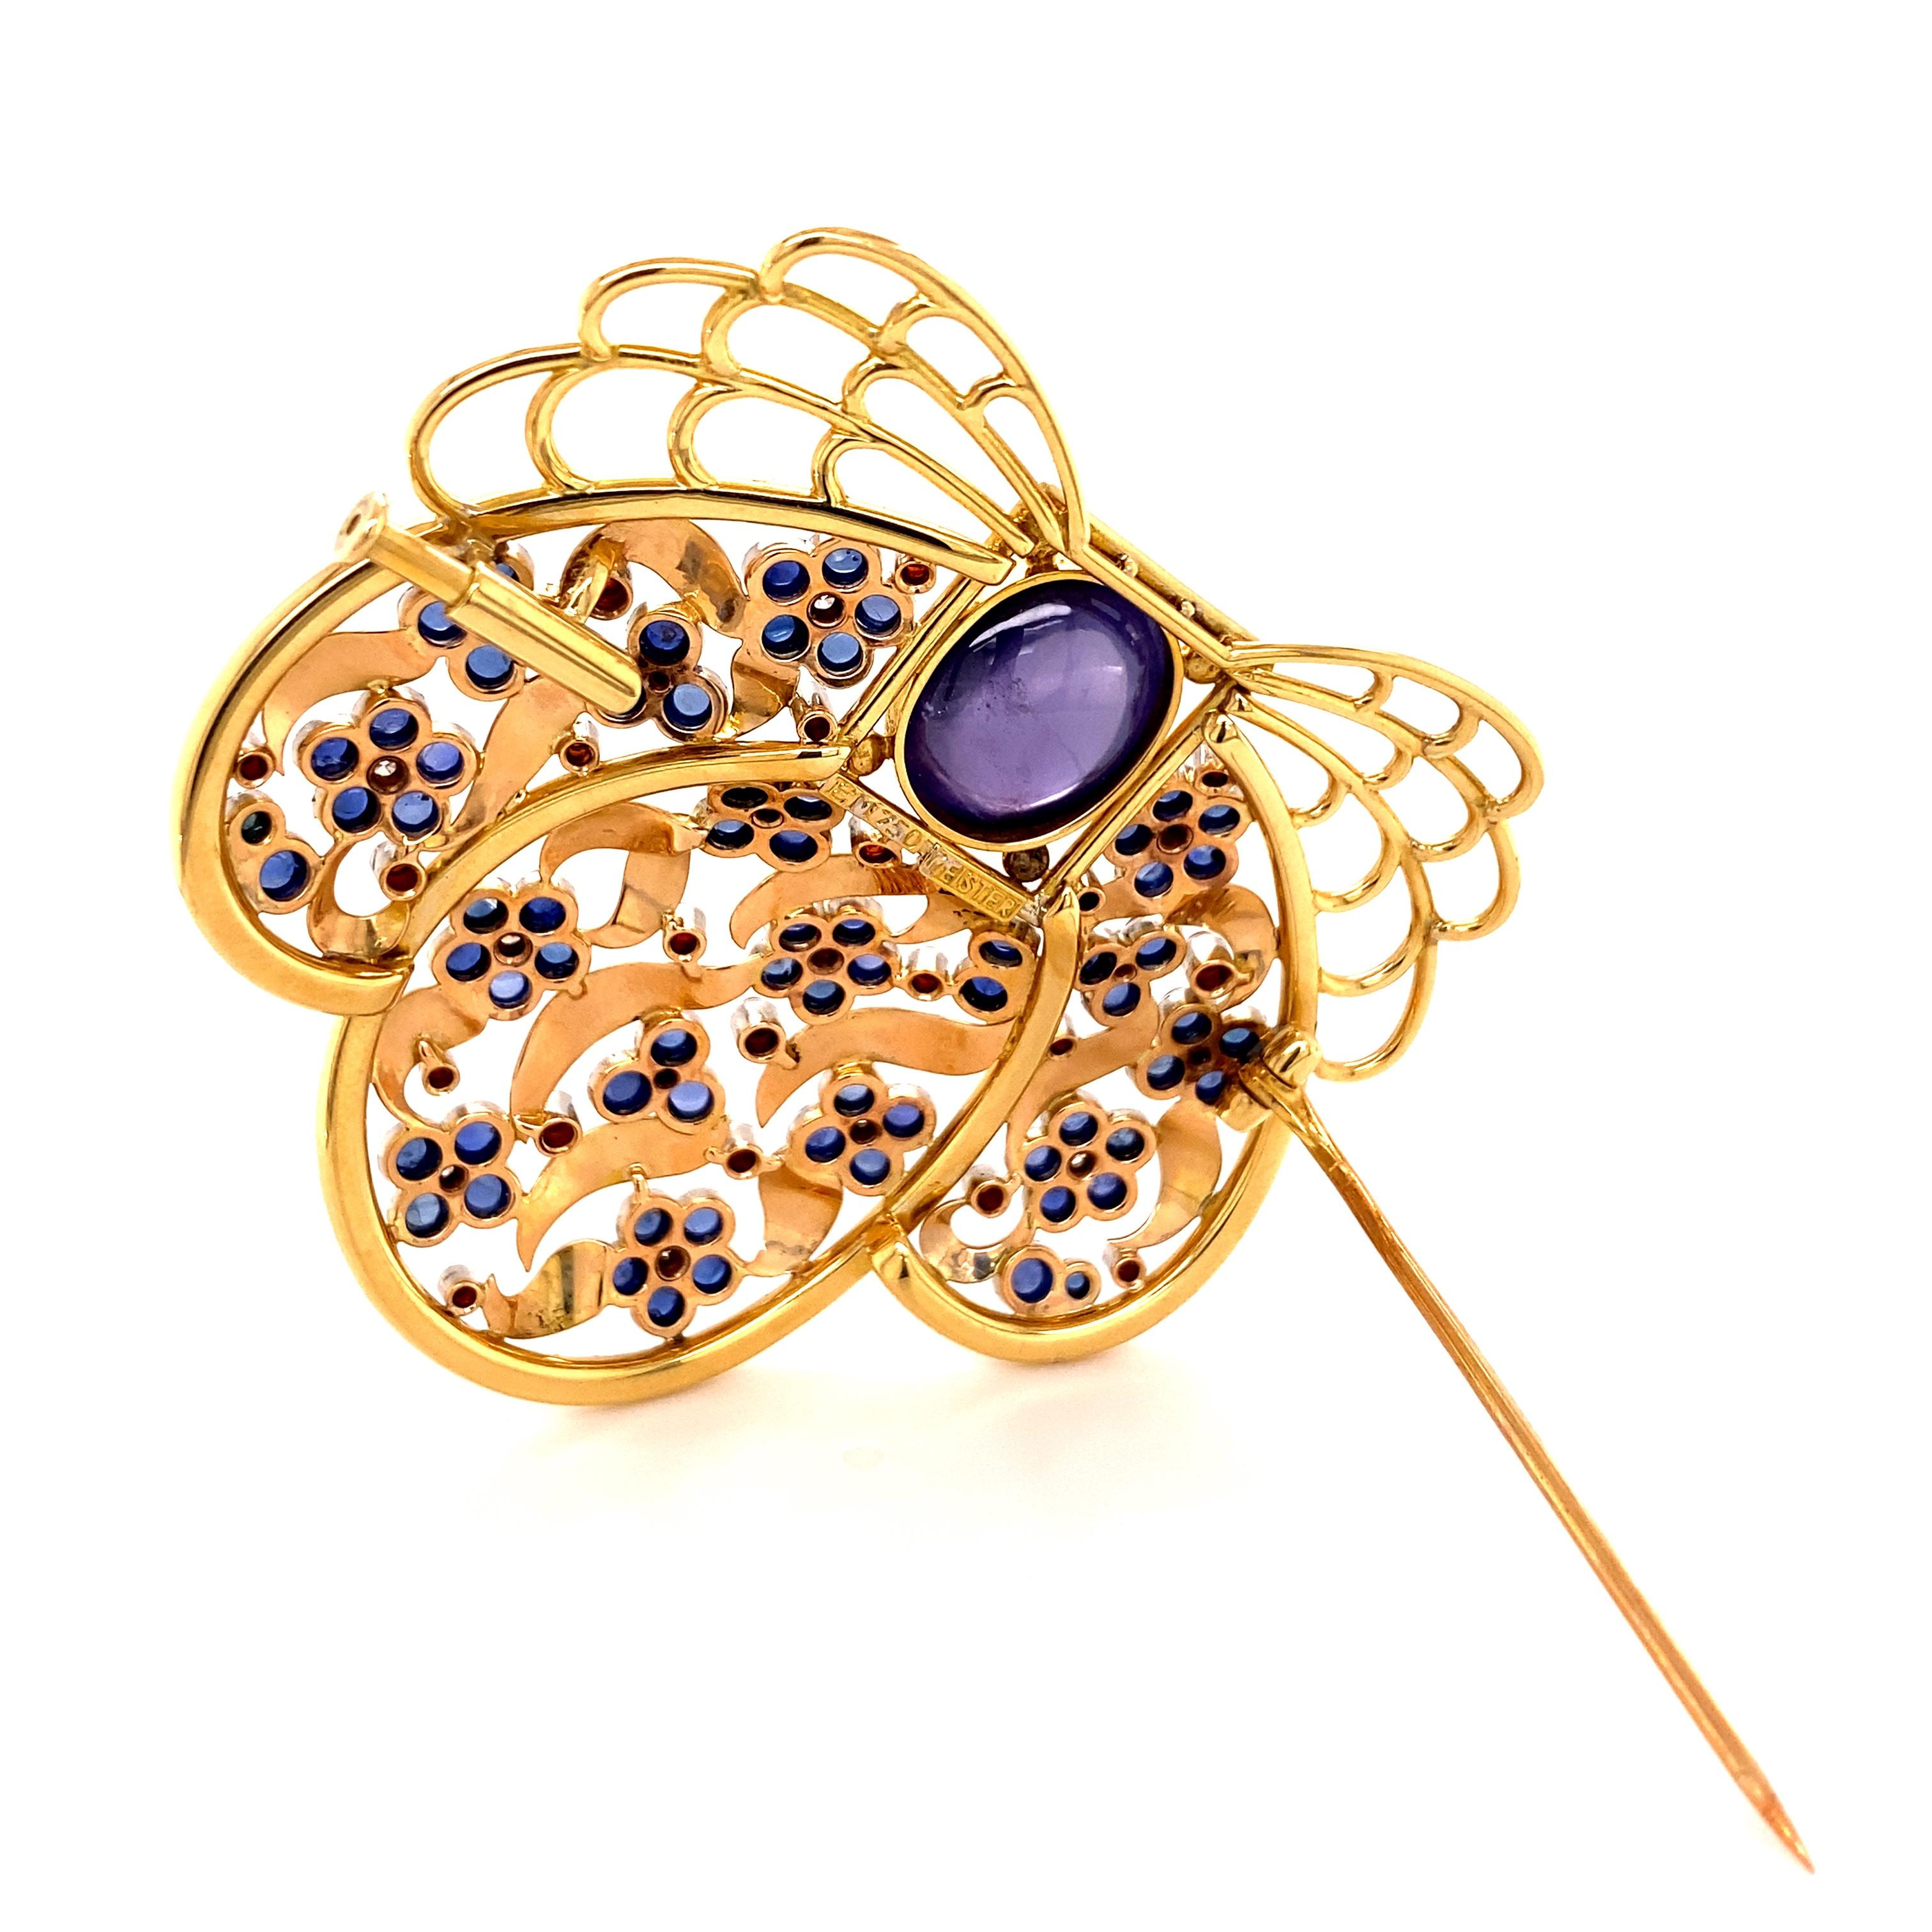 Unique Sapphire and Diamond Brooch by Meister in 18 Karat Gold 1